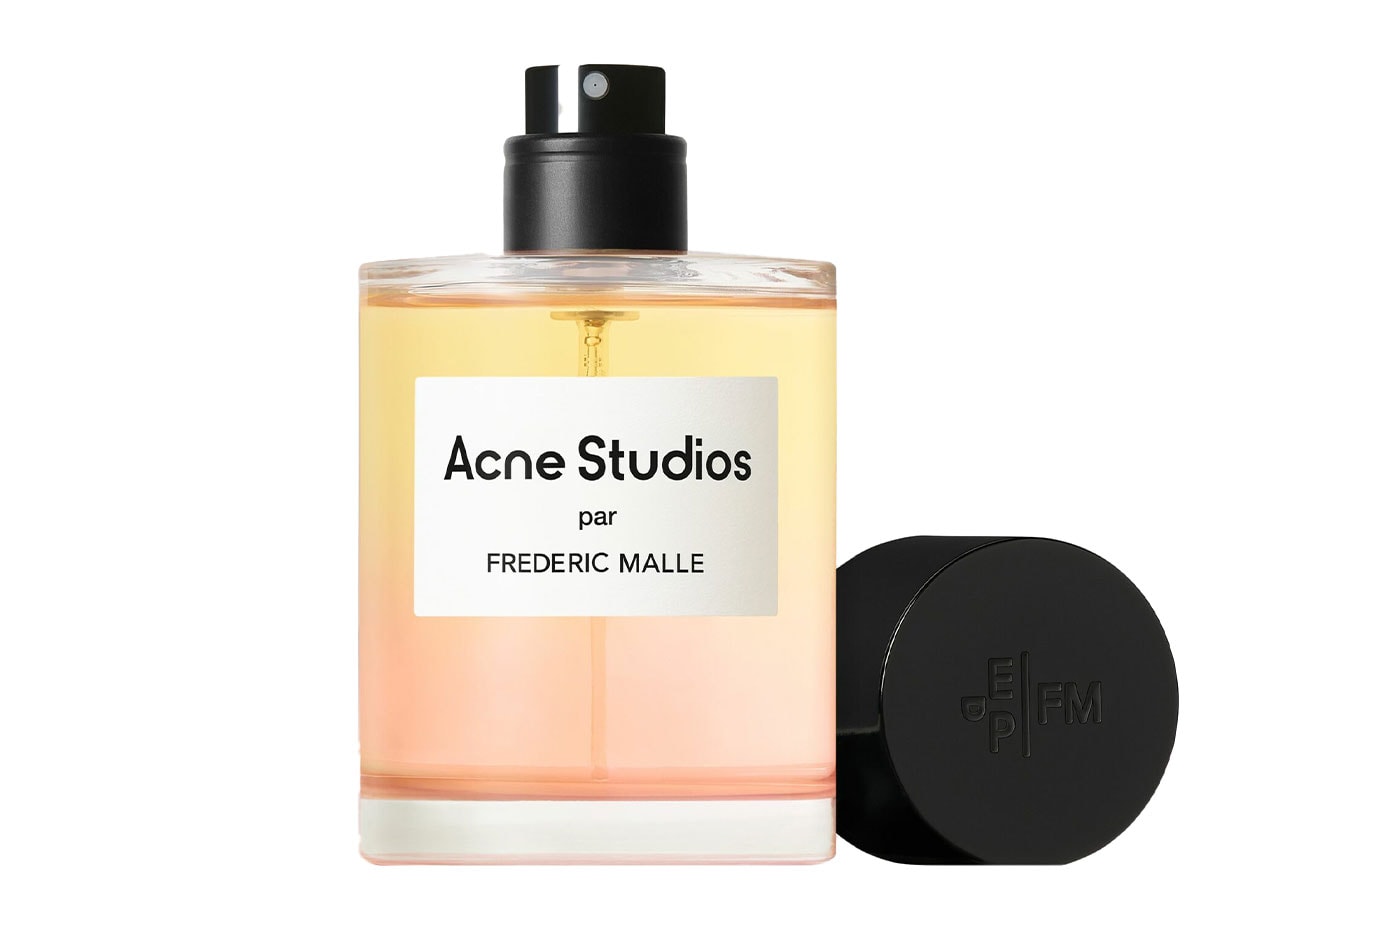 Acne Studios First Perfume Frederic Malle Release Info